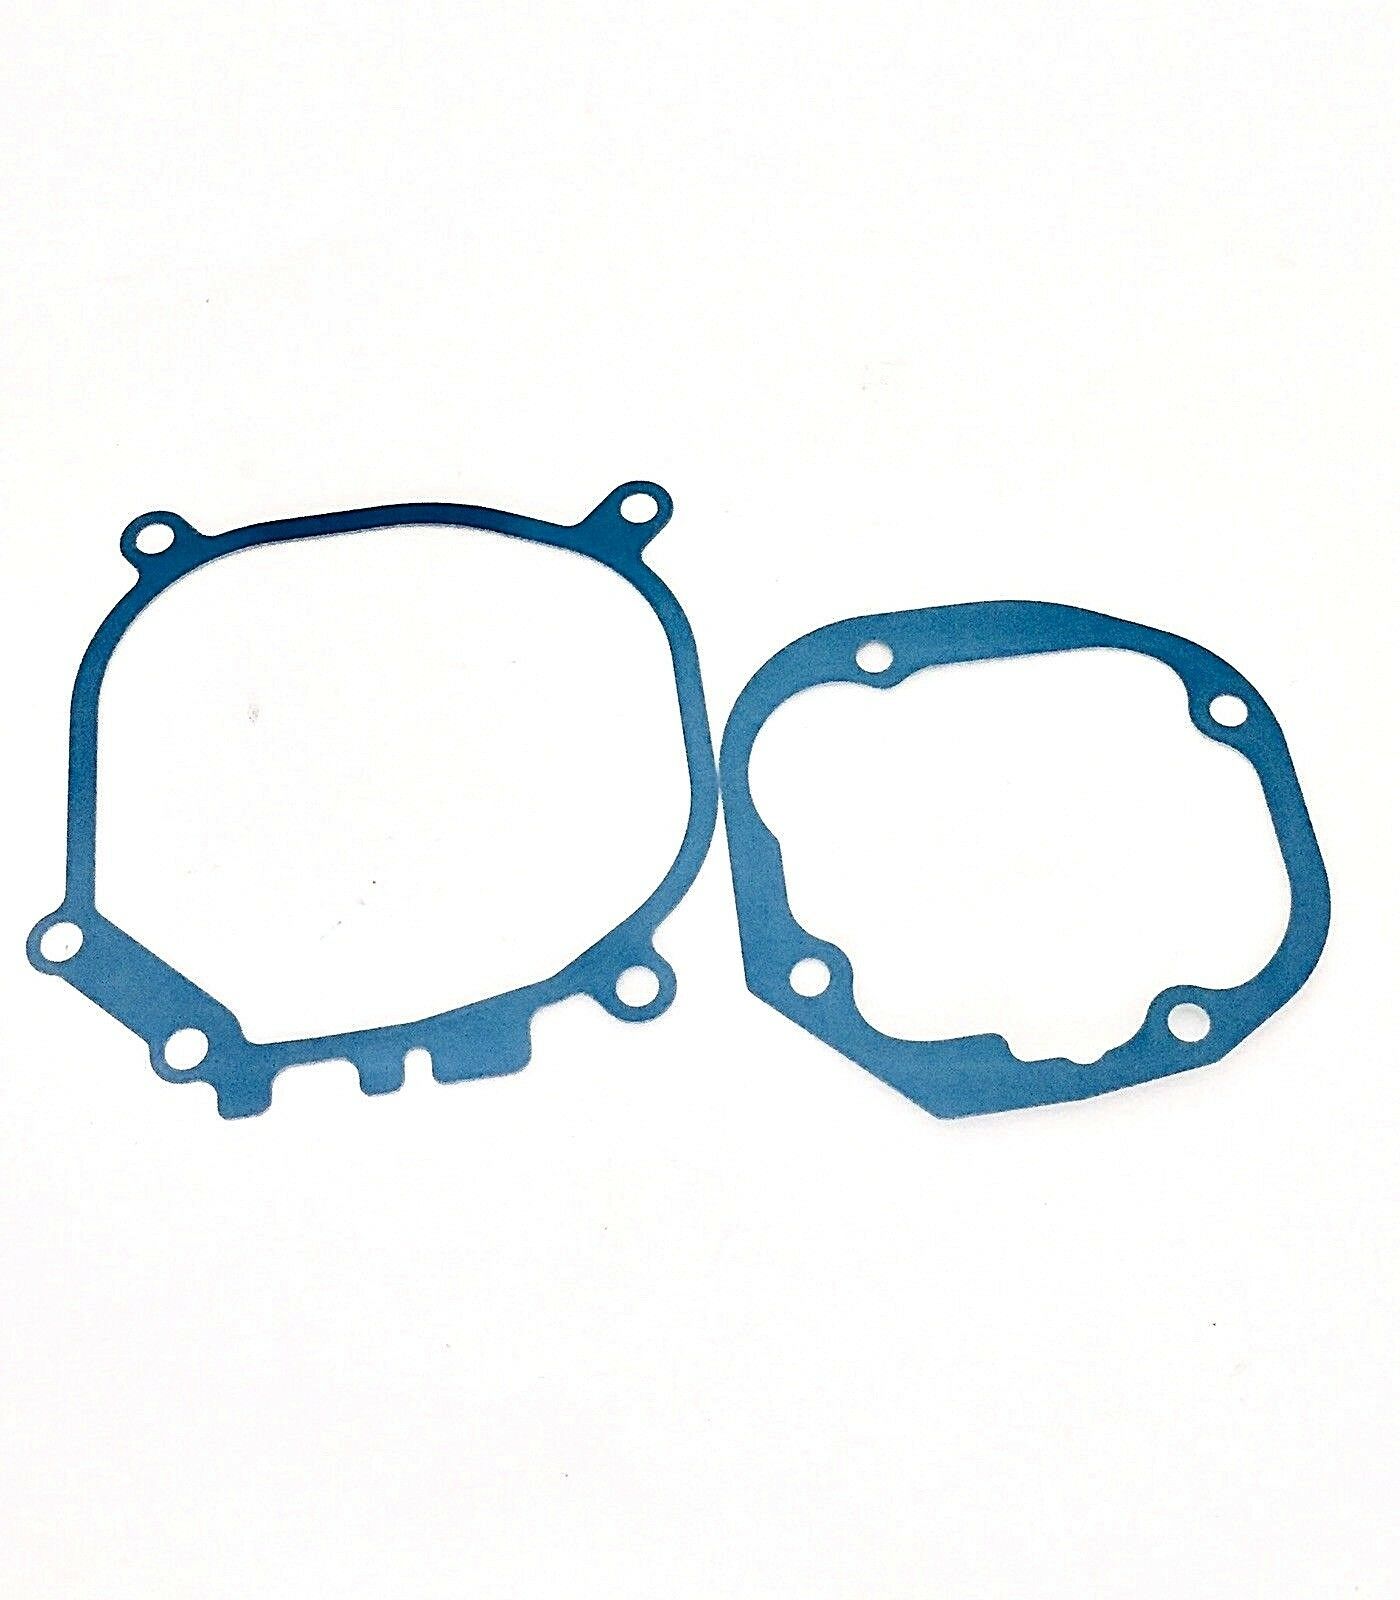 Webasto Gasket Set For At2000 At2000S At2000St At2000Stc 5010159A Heater Part